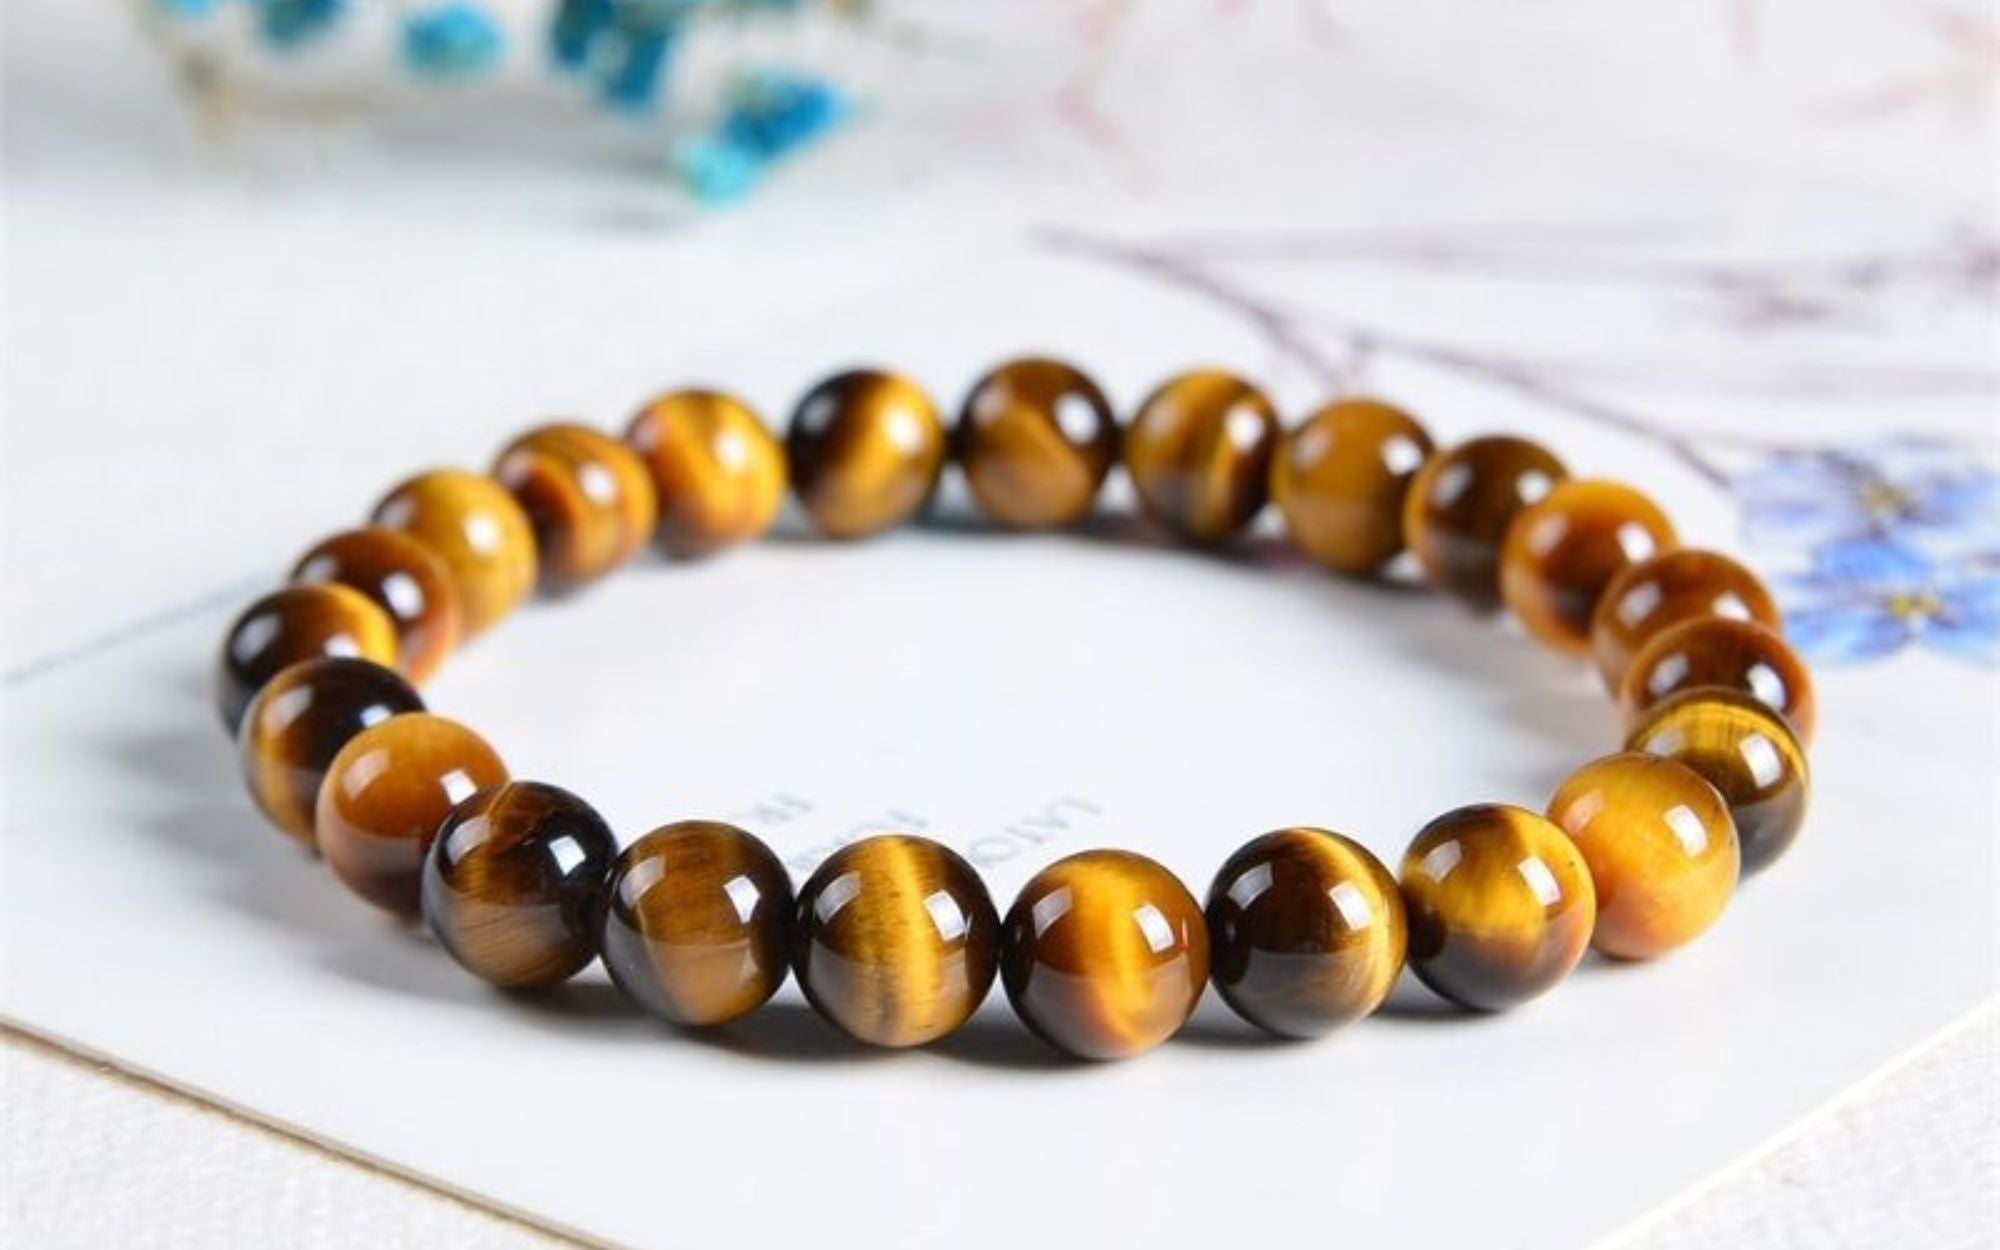 Buy SATYAMANI Natural Stone Iron Tiger Eye Broad Bracelet for Man, Woman,  Boys & Girls- Color: Brown (Pack of 1 Pc.) at Amazon.in